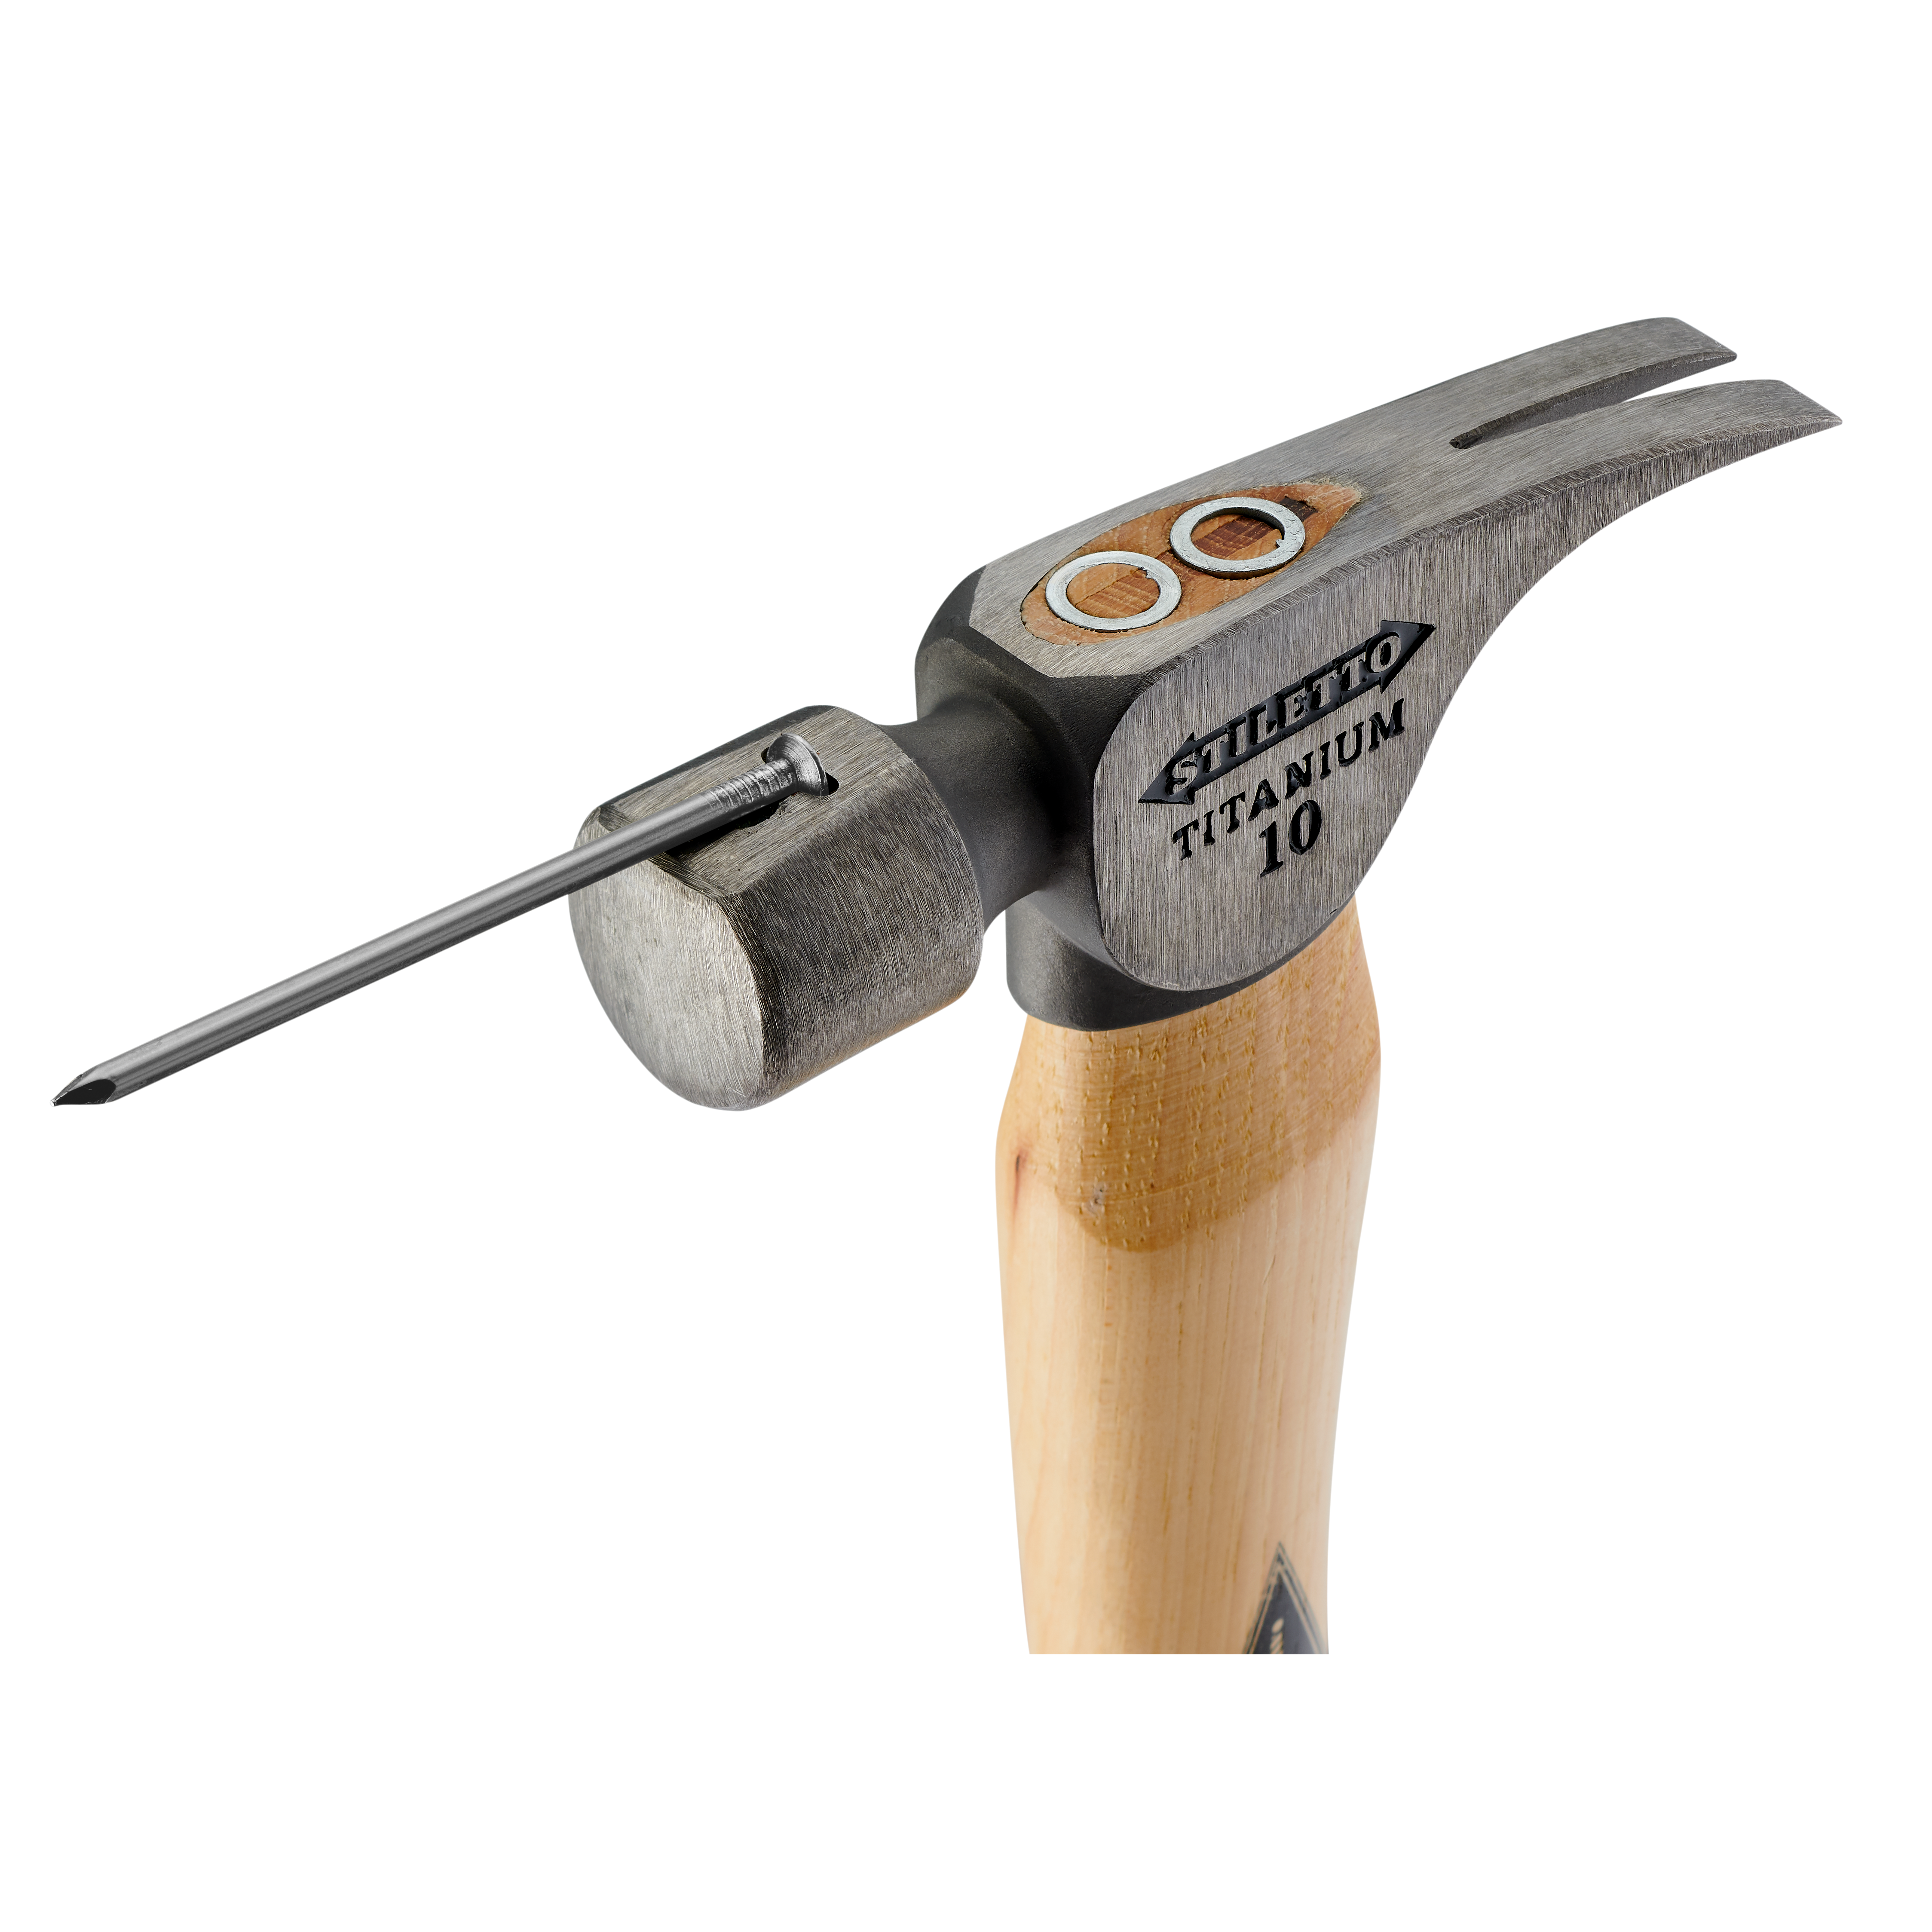 Stiletto Tool 10oz Titanium Hammer with Smooth Face and 14.5" Curved Hickory Handle